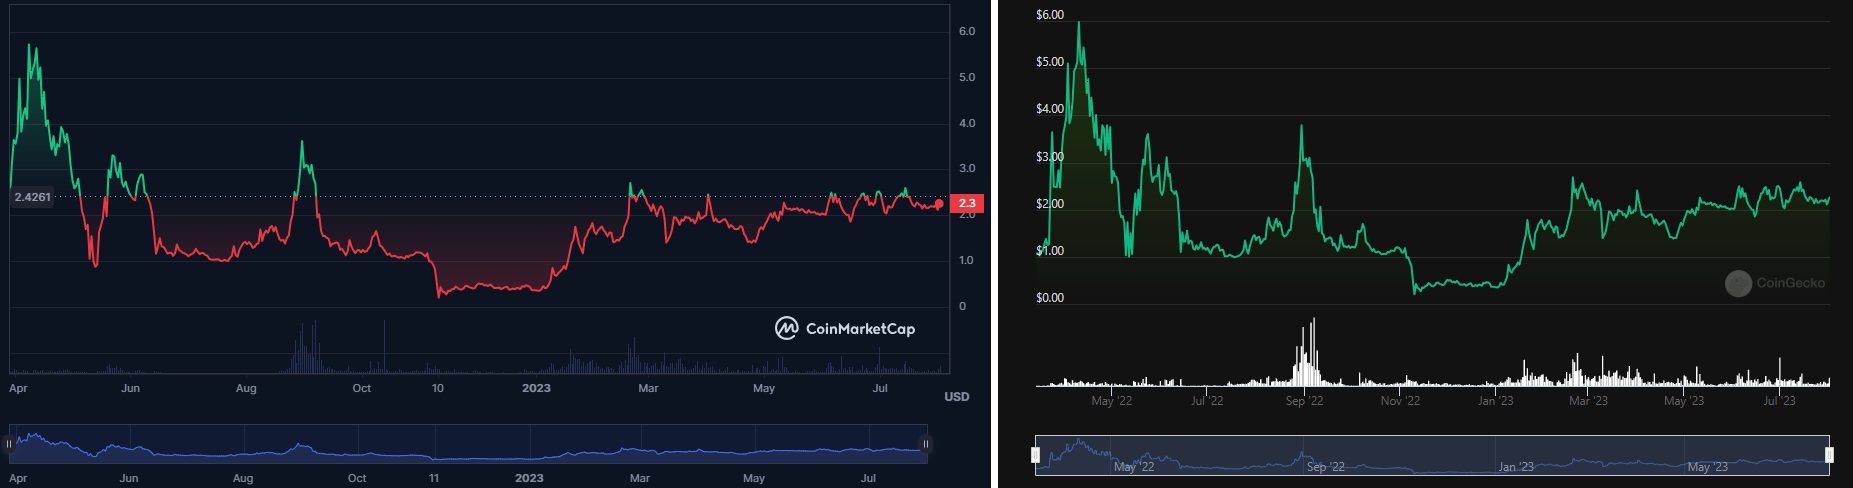 Price chart and technical analysis chart of the DUST coin